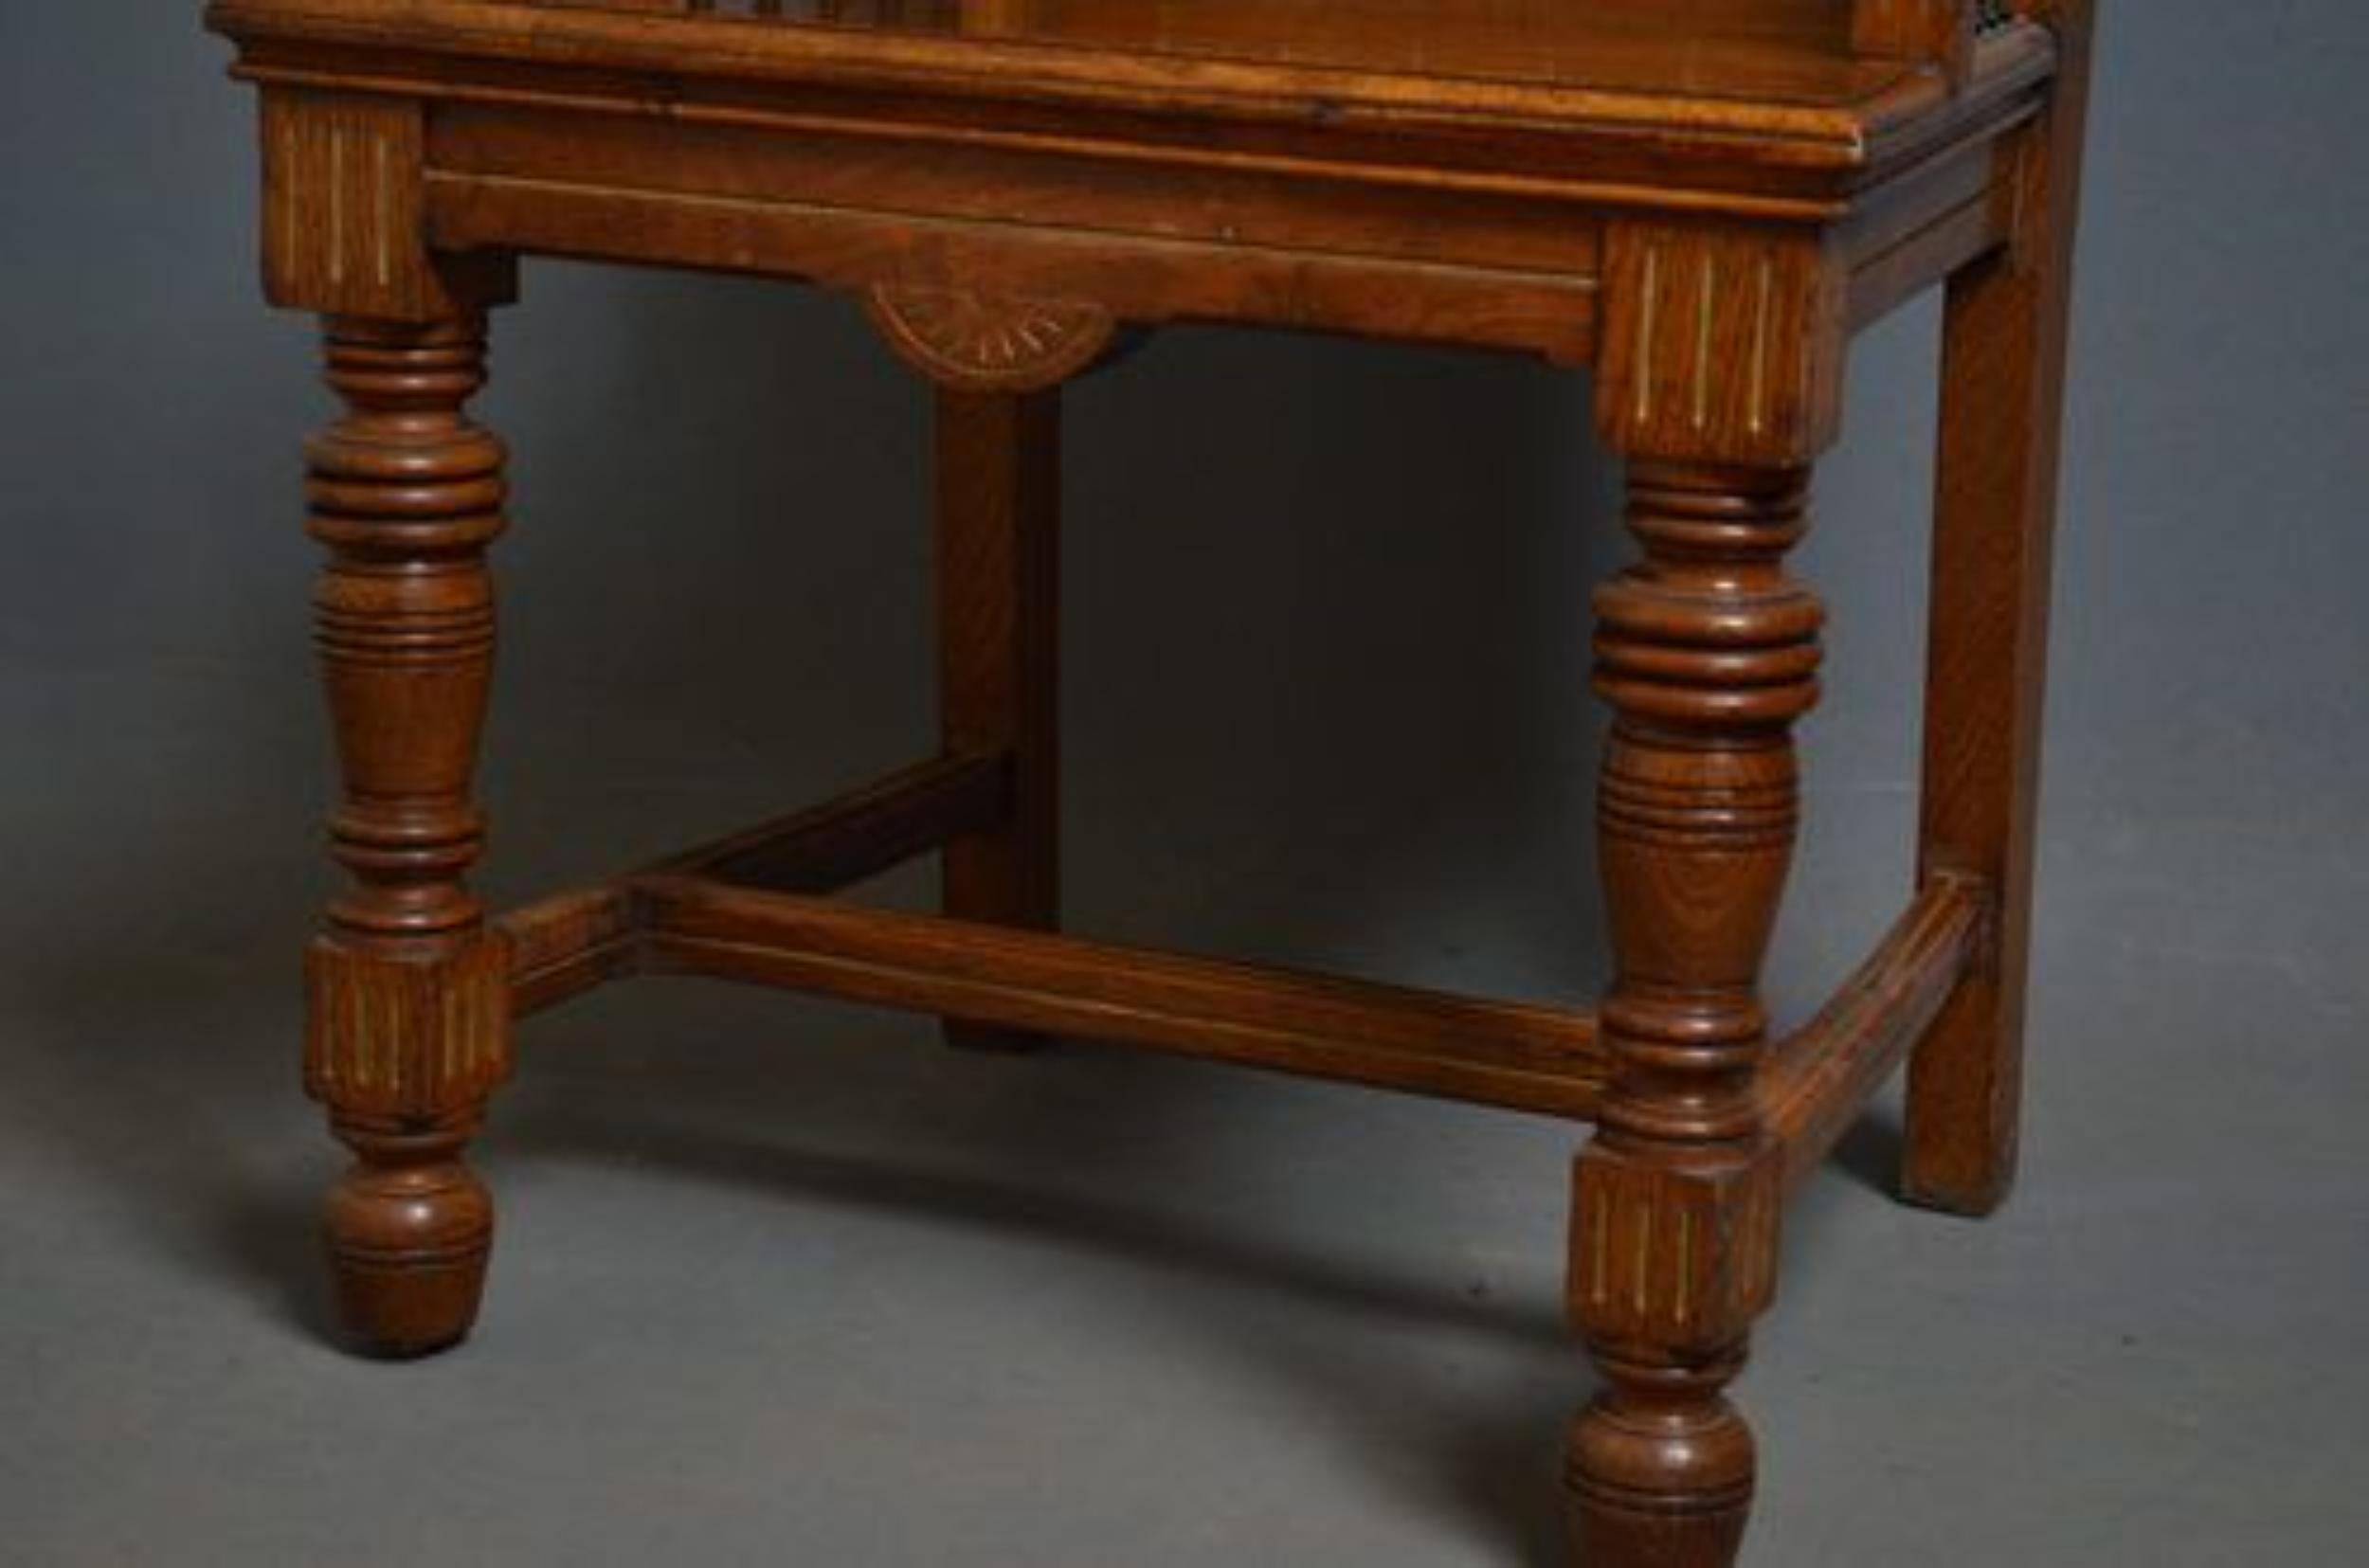 Sn692 A superb example of an Arts & Crafts - Gothic revival hall chair constructed from pollard oak having ebonised finials to the back and sides, well defined carved floral panels, standing on turned legs with stretcher to the base, all with carved